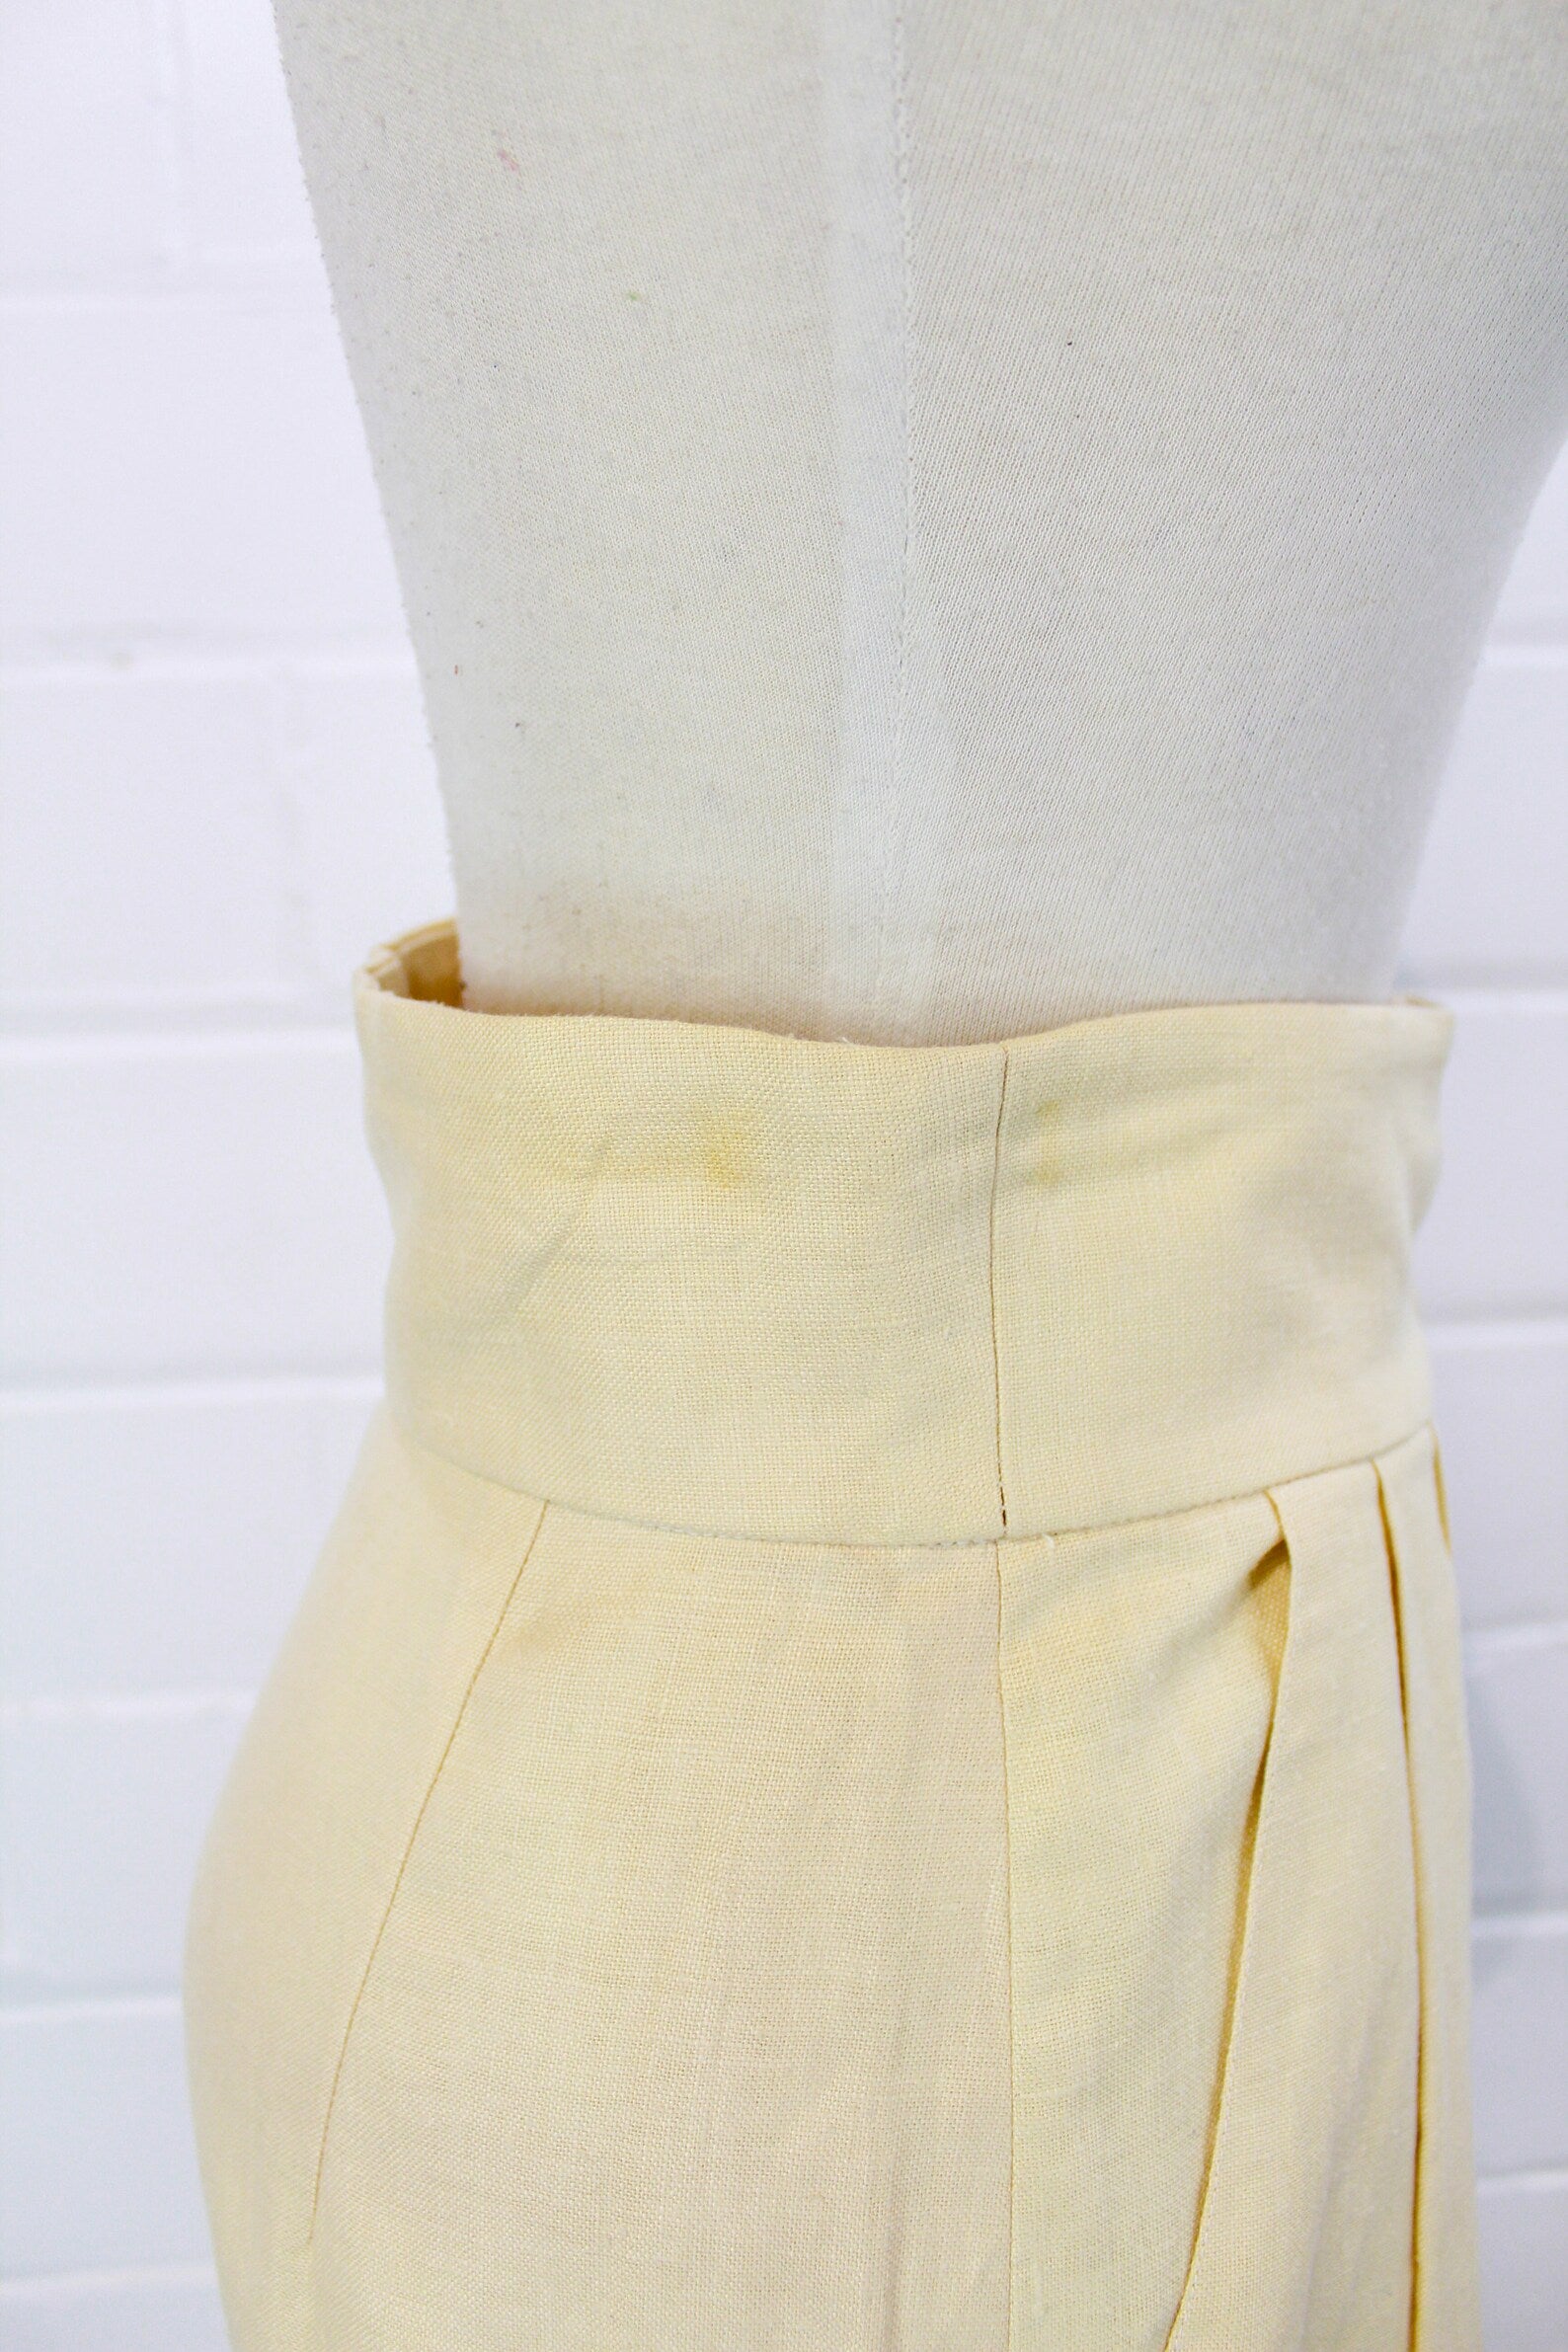 Vintage 1940s laced up corset girdle skirt in size 28 DEAD STOCK ! CREAM  COLOR